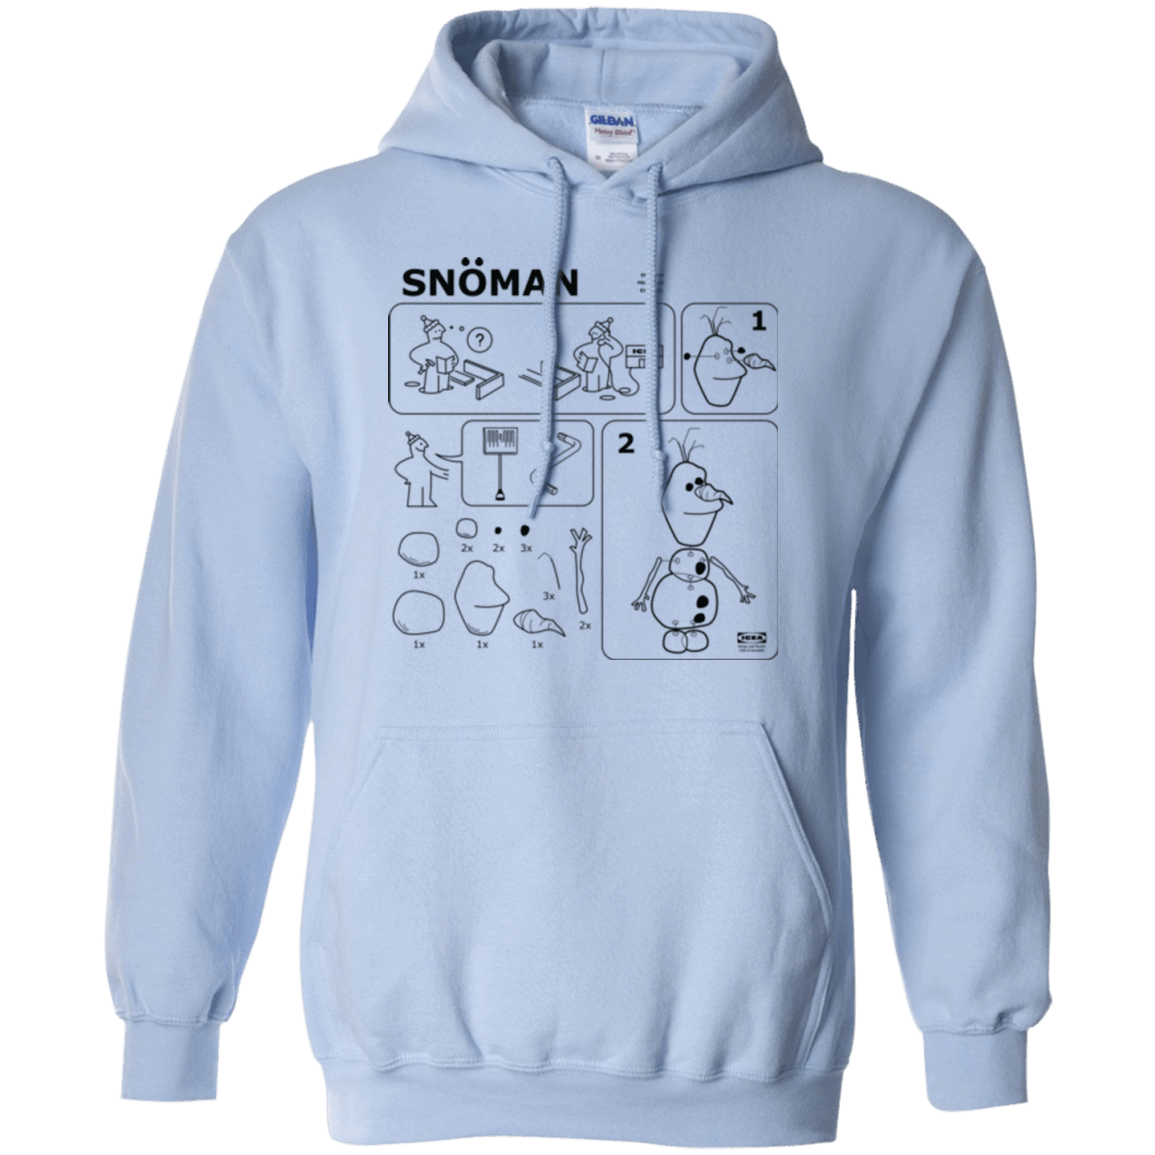 Sweatshirts Light Blue / Small Build a Snowman Pullover Hoodie